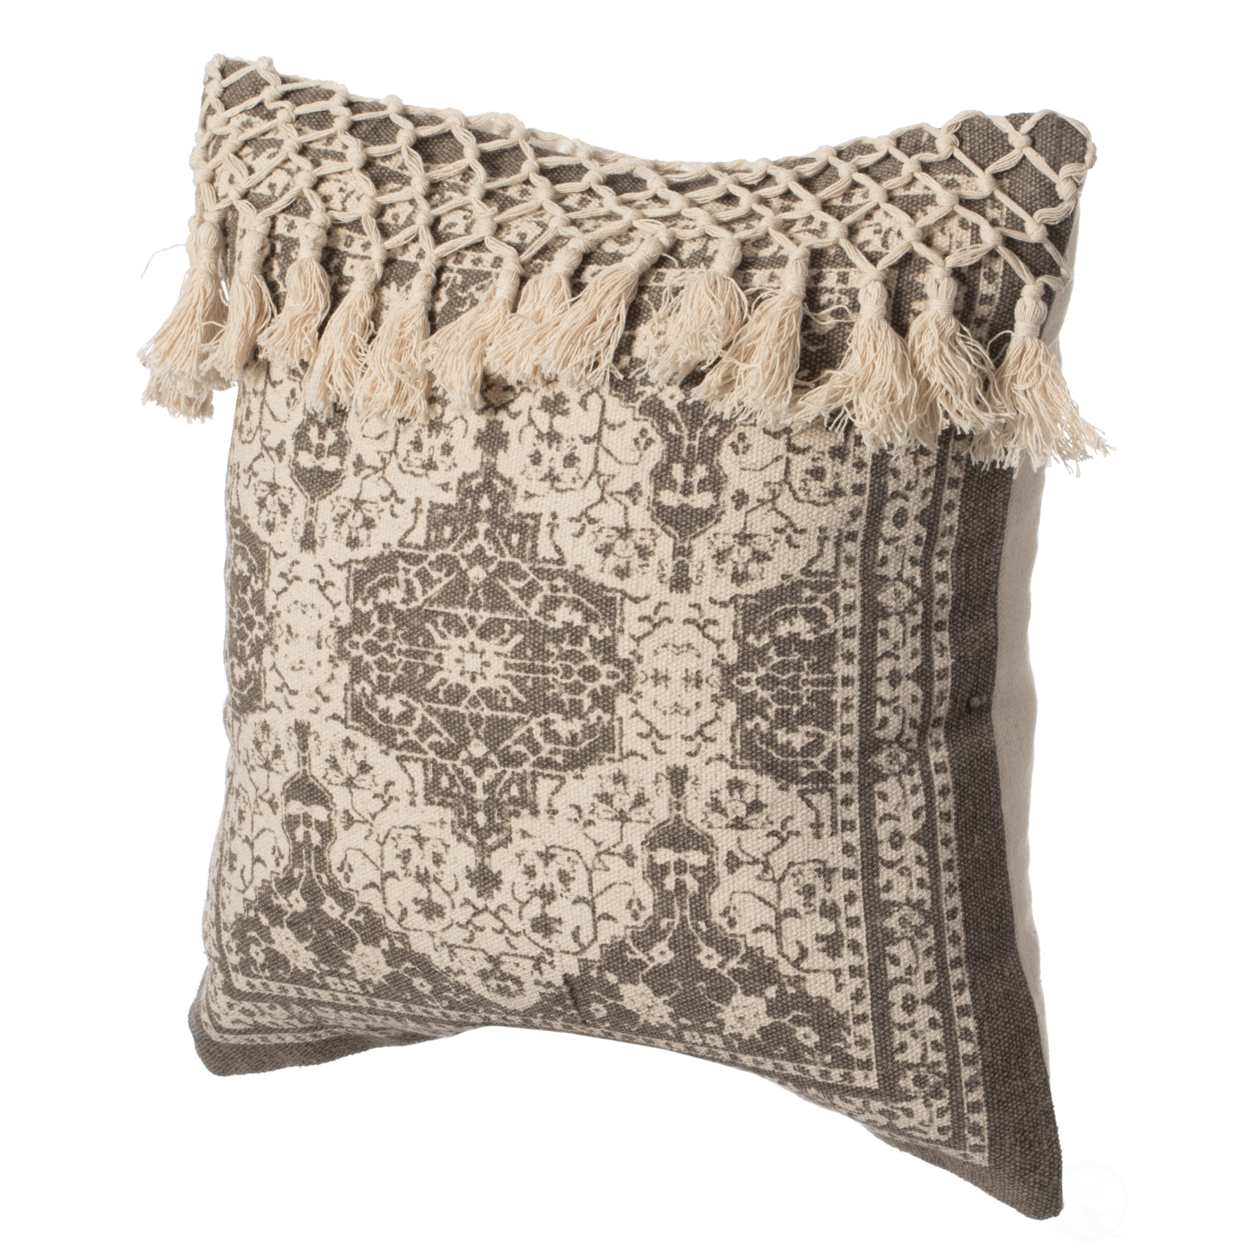 16 Handwoven Cotton Throw Pillow Cover With Traditional Pattern And Tasseled Top - Beige